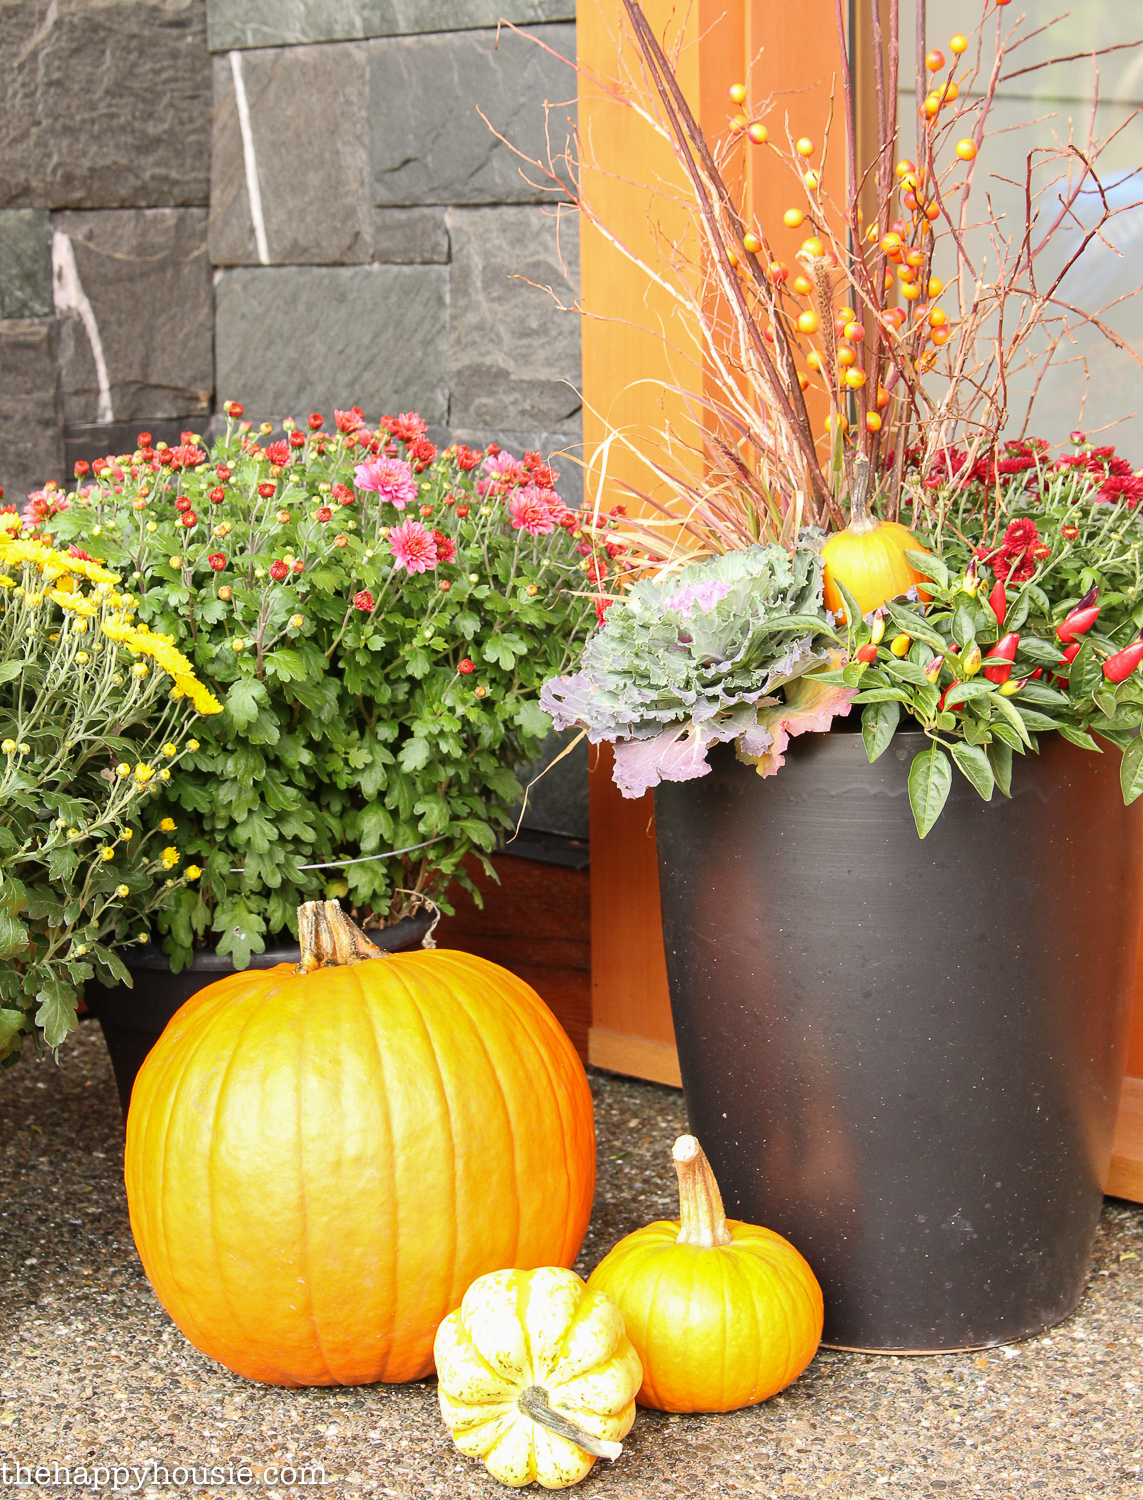 Large planters filled with red and purple flowers, and kale, with pumpkins in front of them.